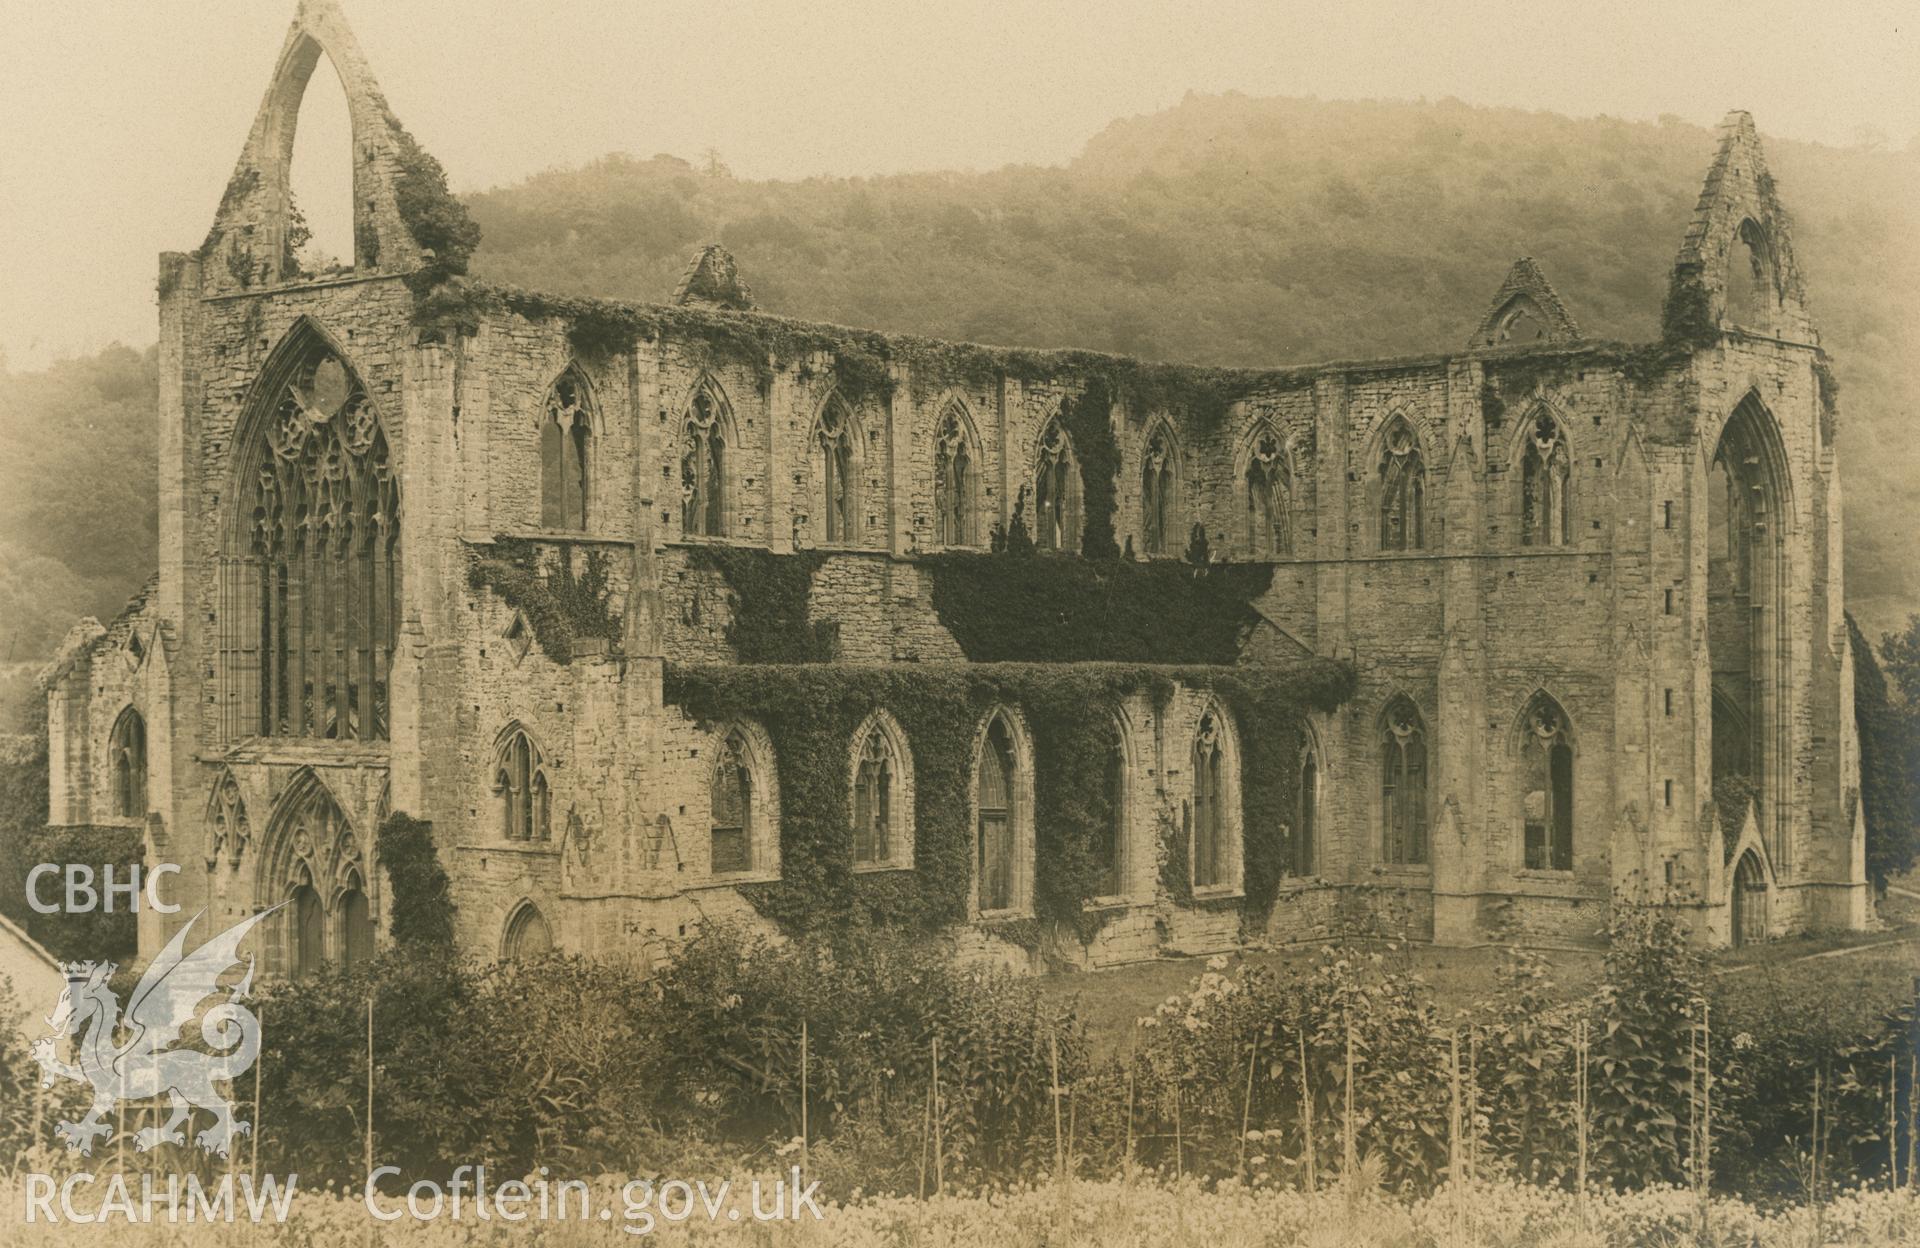 Digital copy of a general view of Tintern Abbey from the southwest.